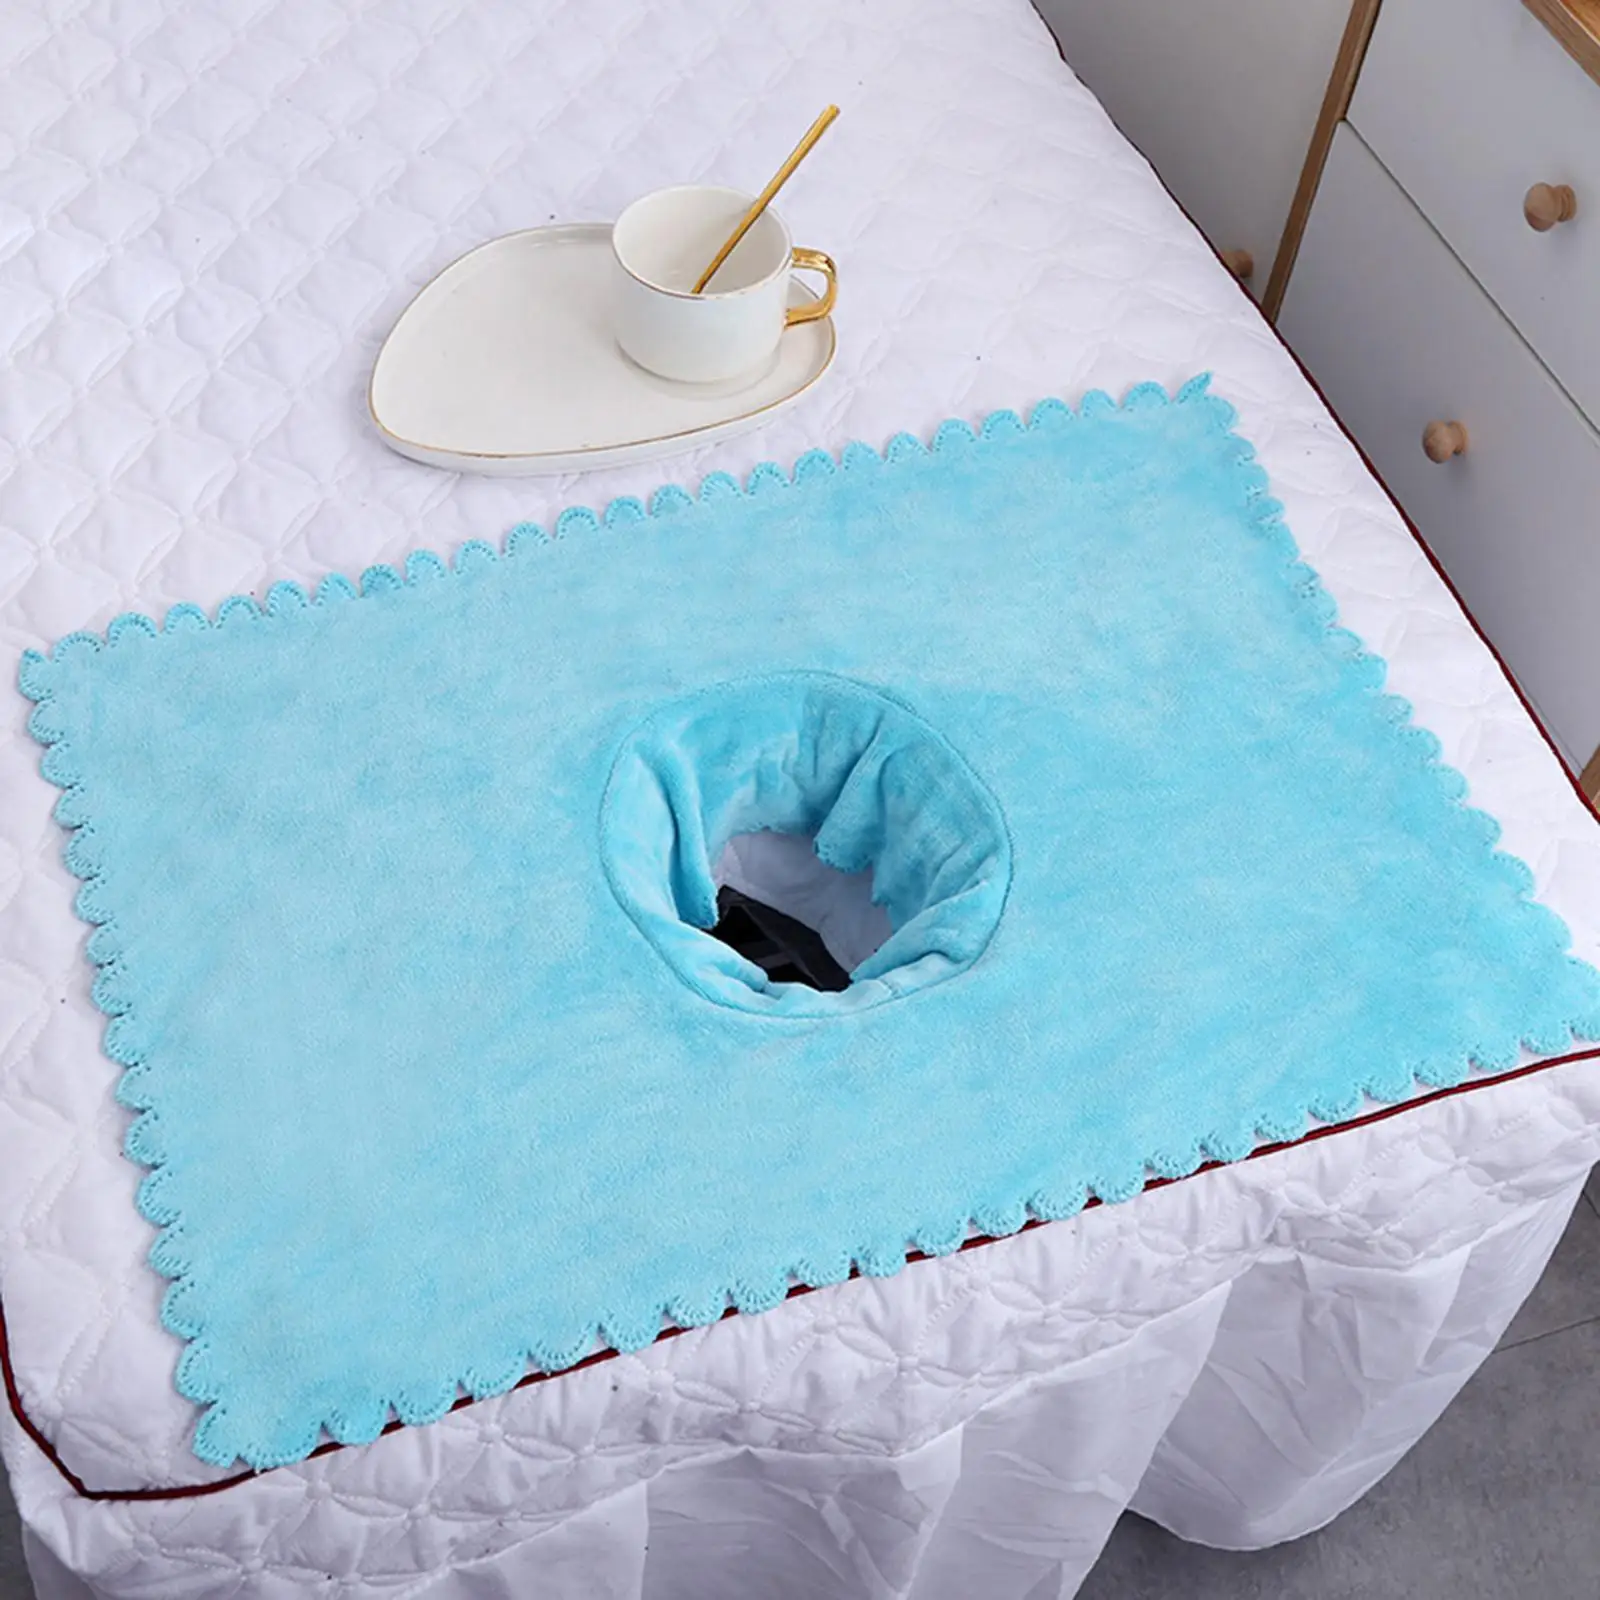 Massage Table Sheet Covers with Face Hole Reusable Soft 23.62x15.75inch Sectional Towelling Coverlet Towel for Beauty Salon SPA